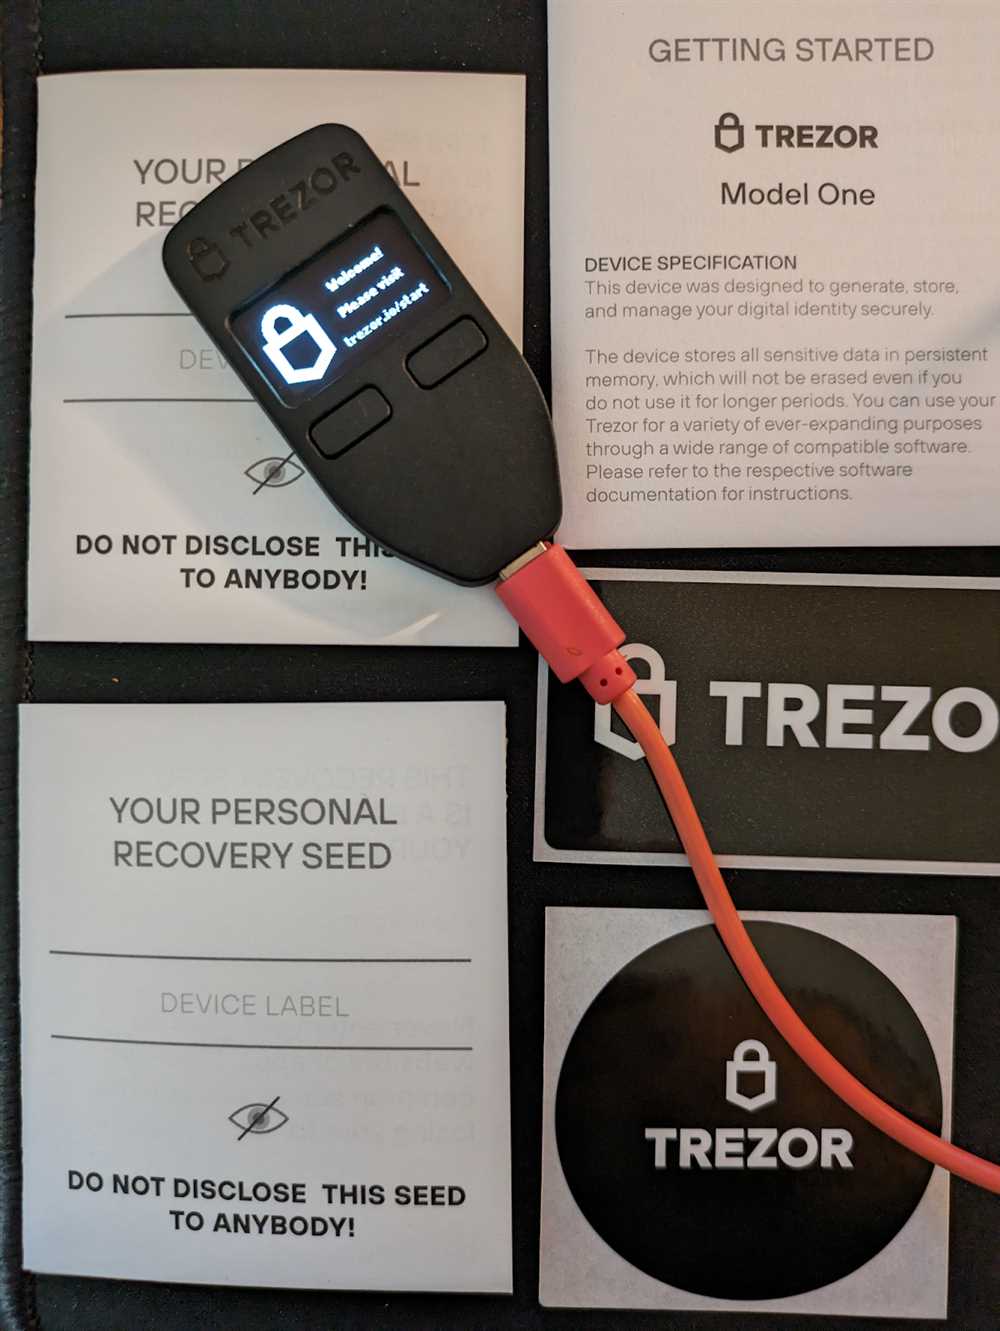 Step 1: Access your Trezor Wallet